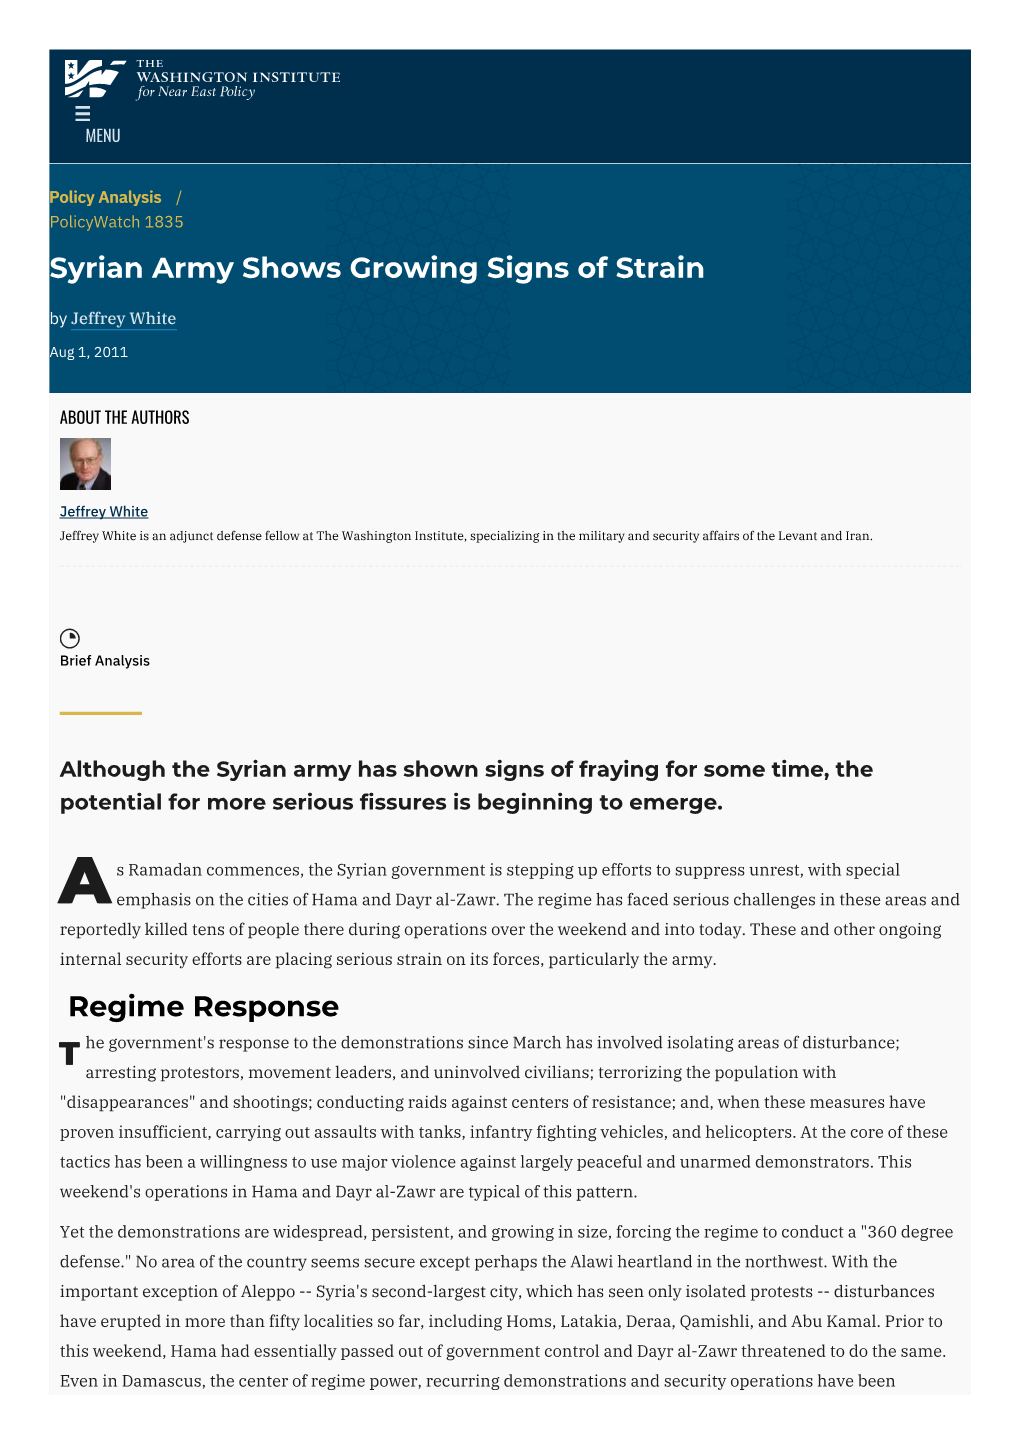 Syrian Army Shows Growing Signs of Strain | the Washington Institute